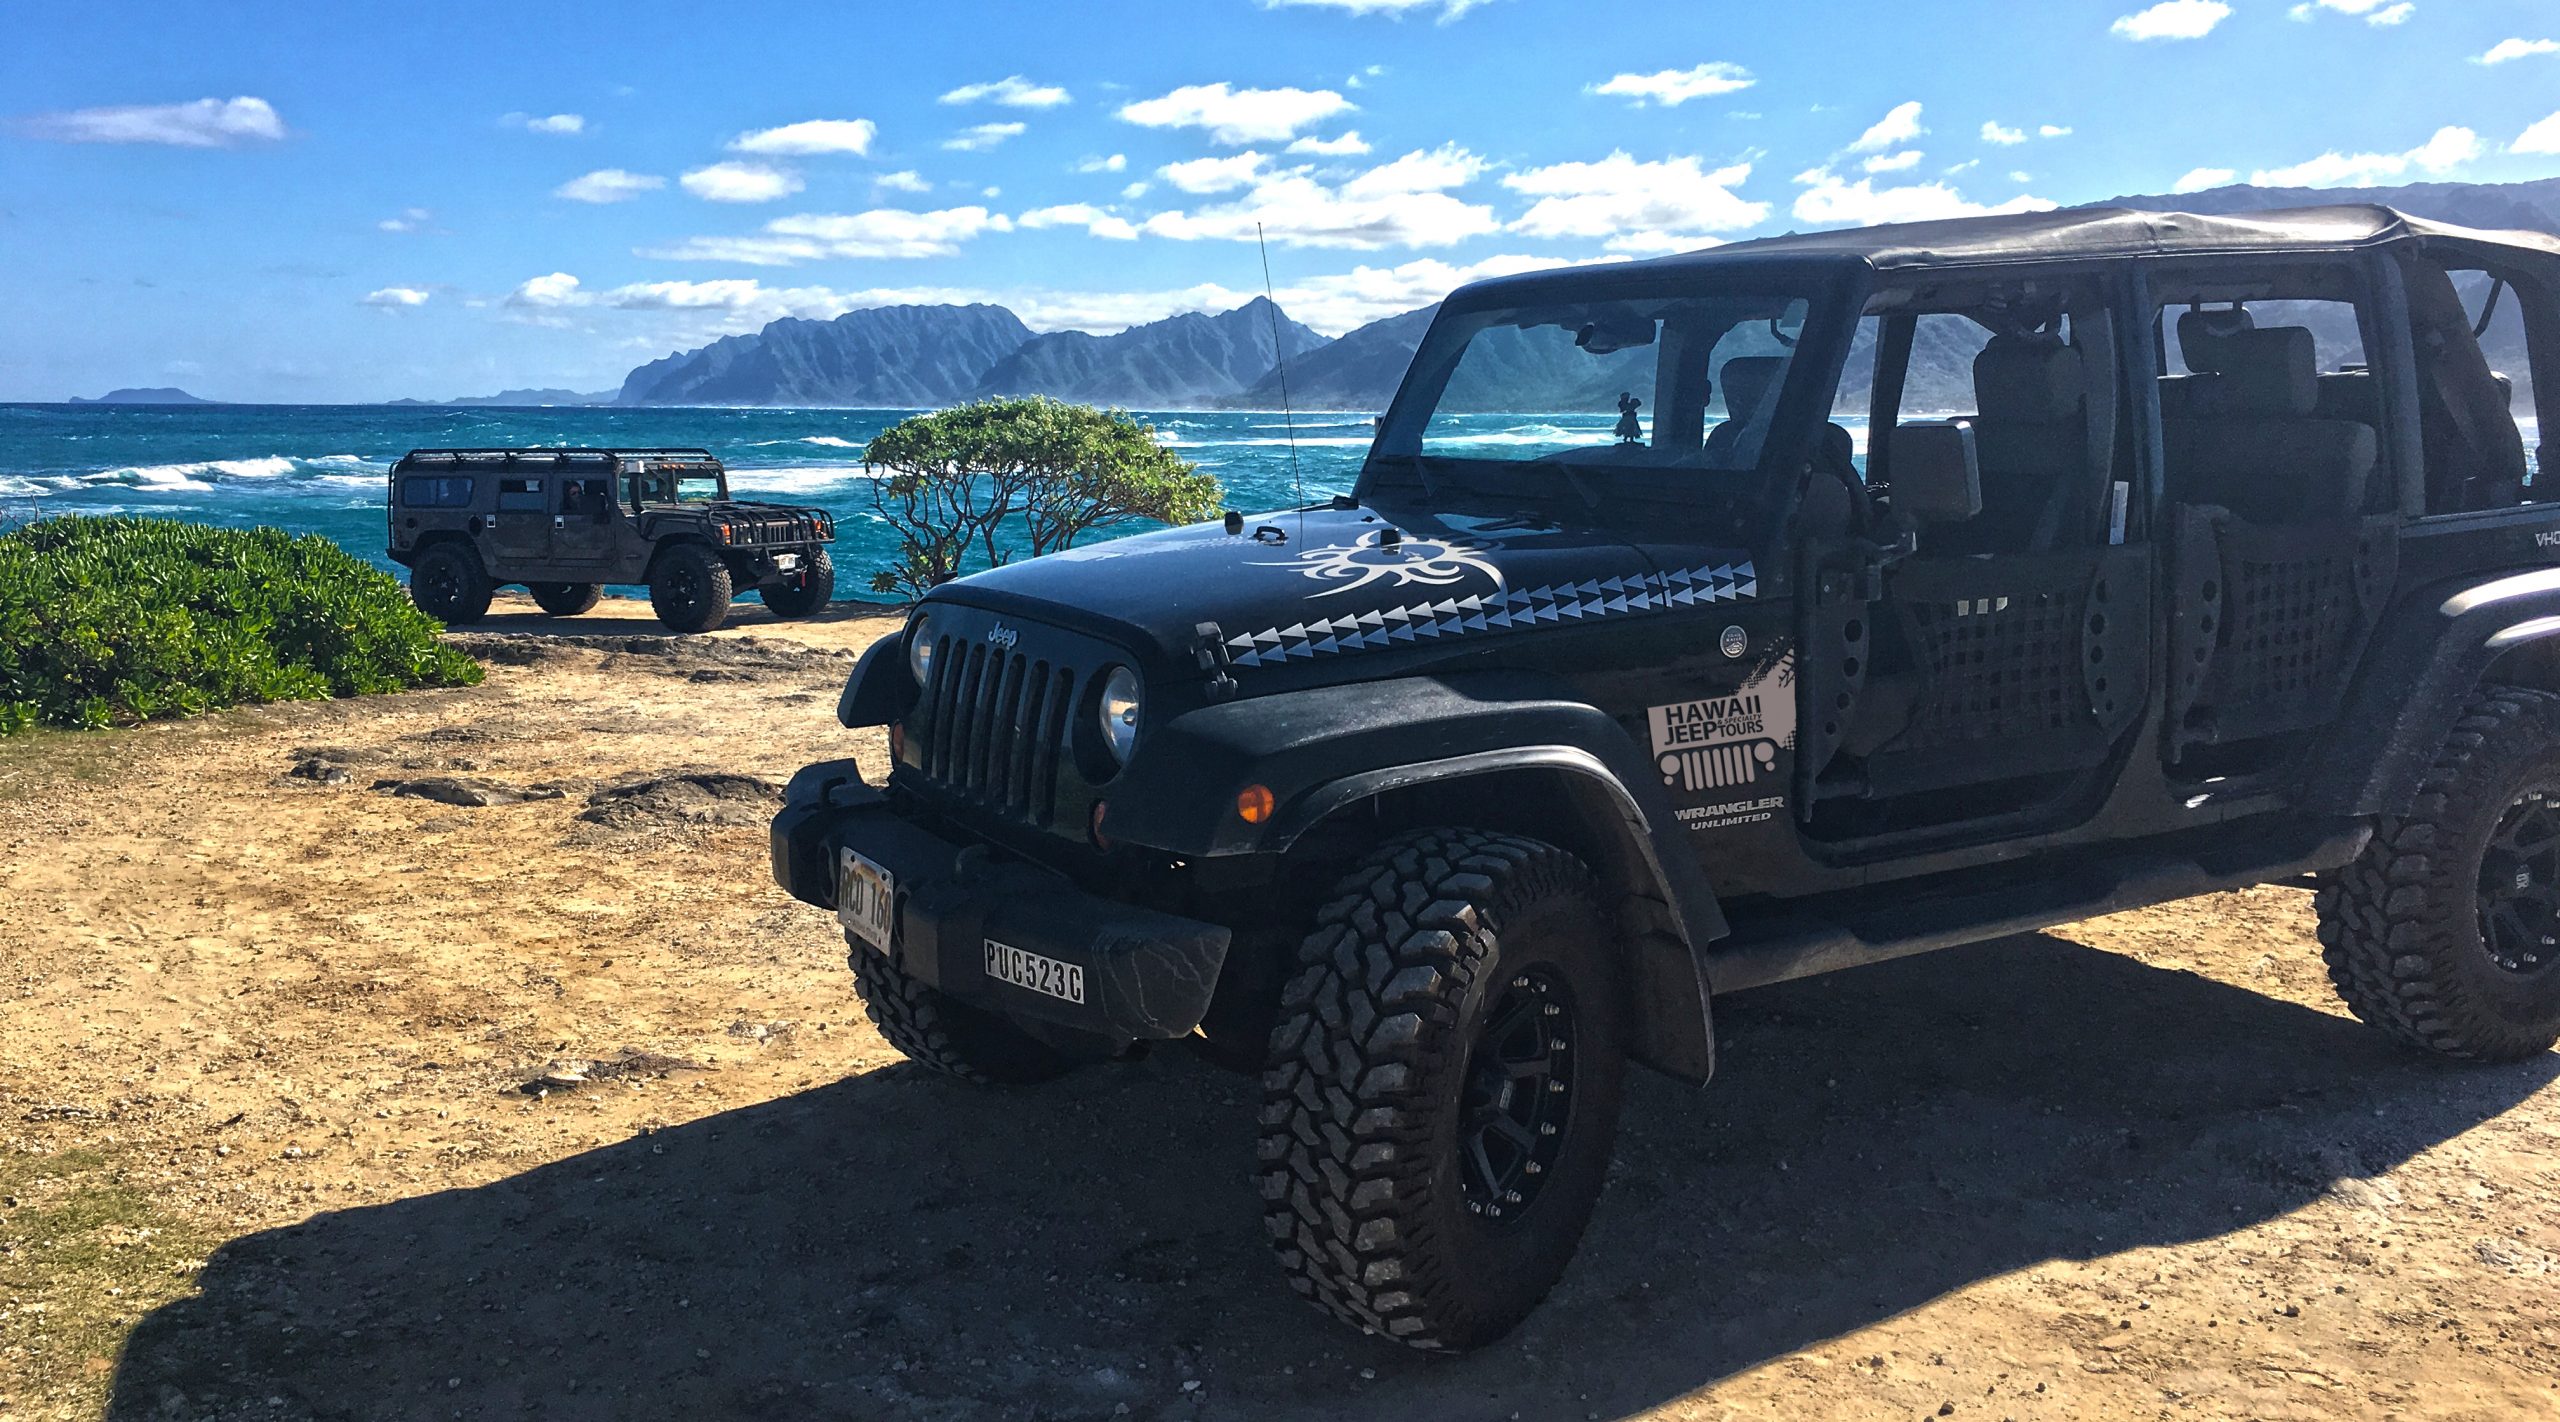 jeep tours in hawaii